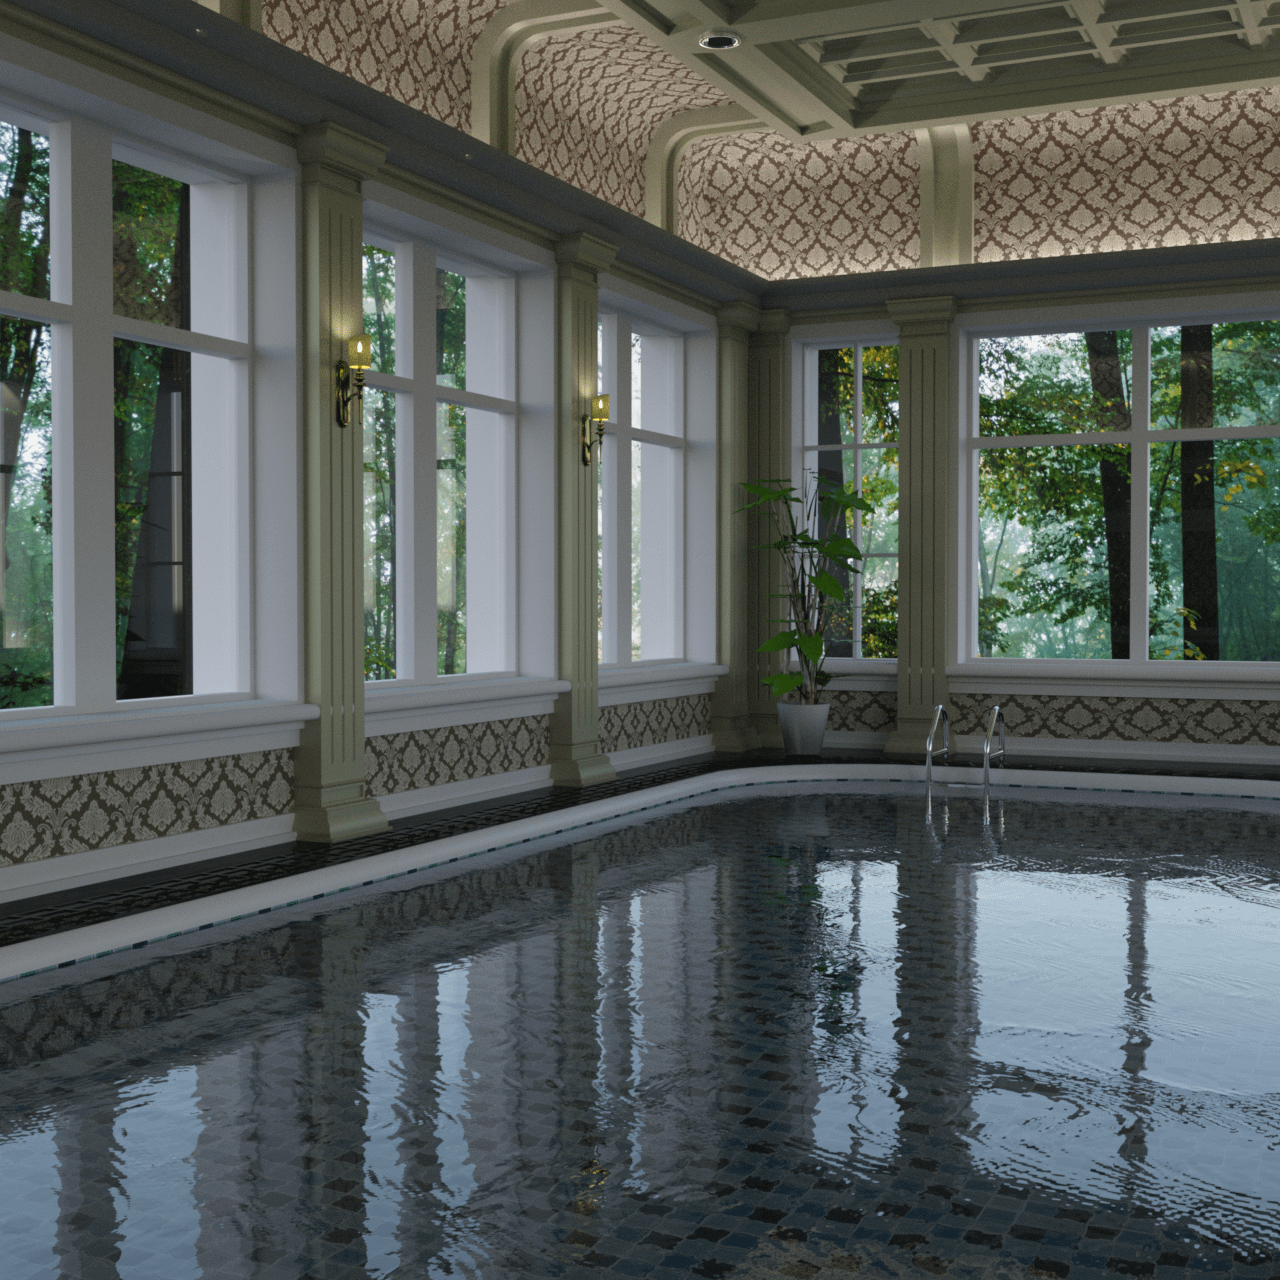 Differen backdrop with a wood applied to the classic indoor pool 3d model